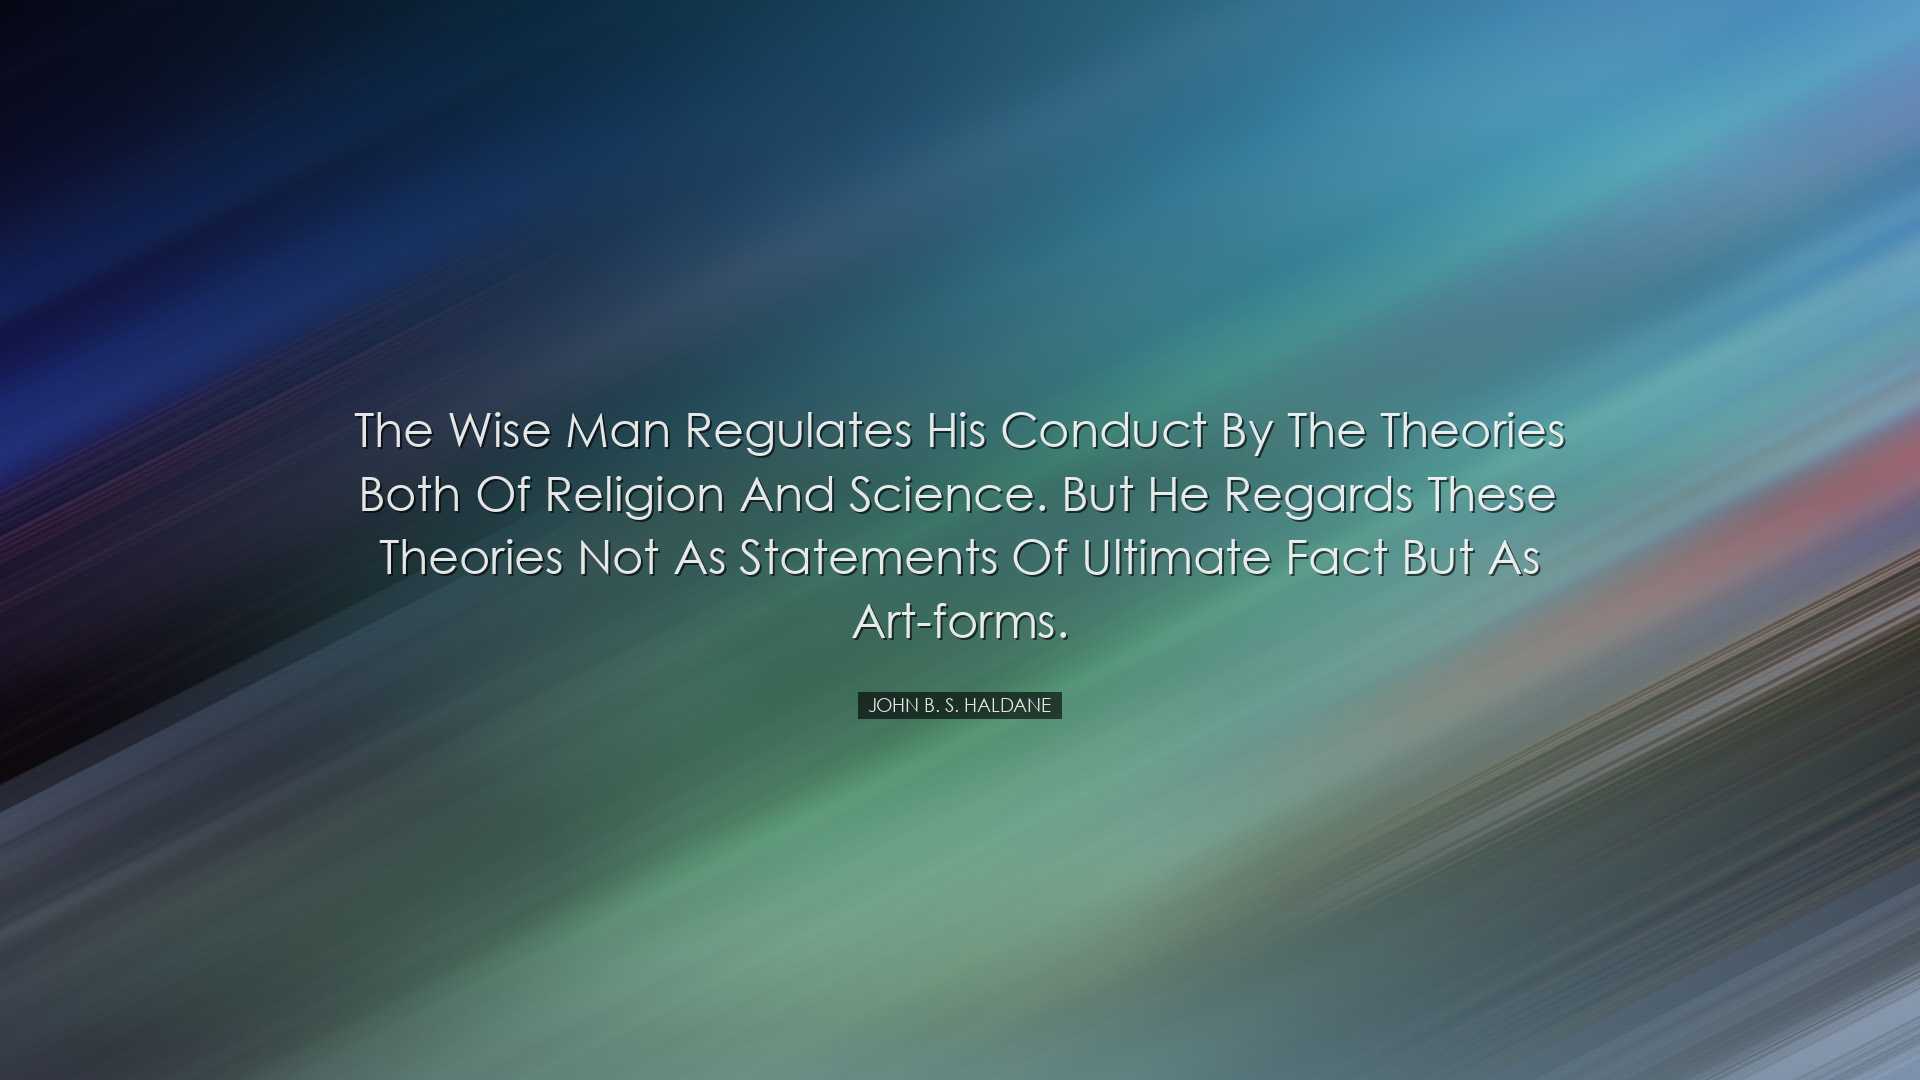 The wise man regulates his conduct by the theories both of religio